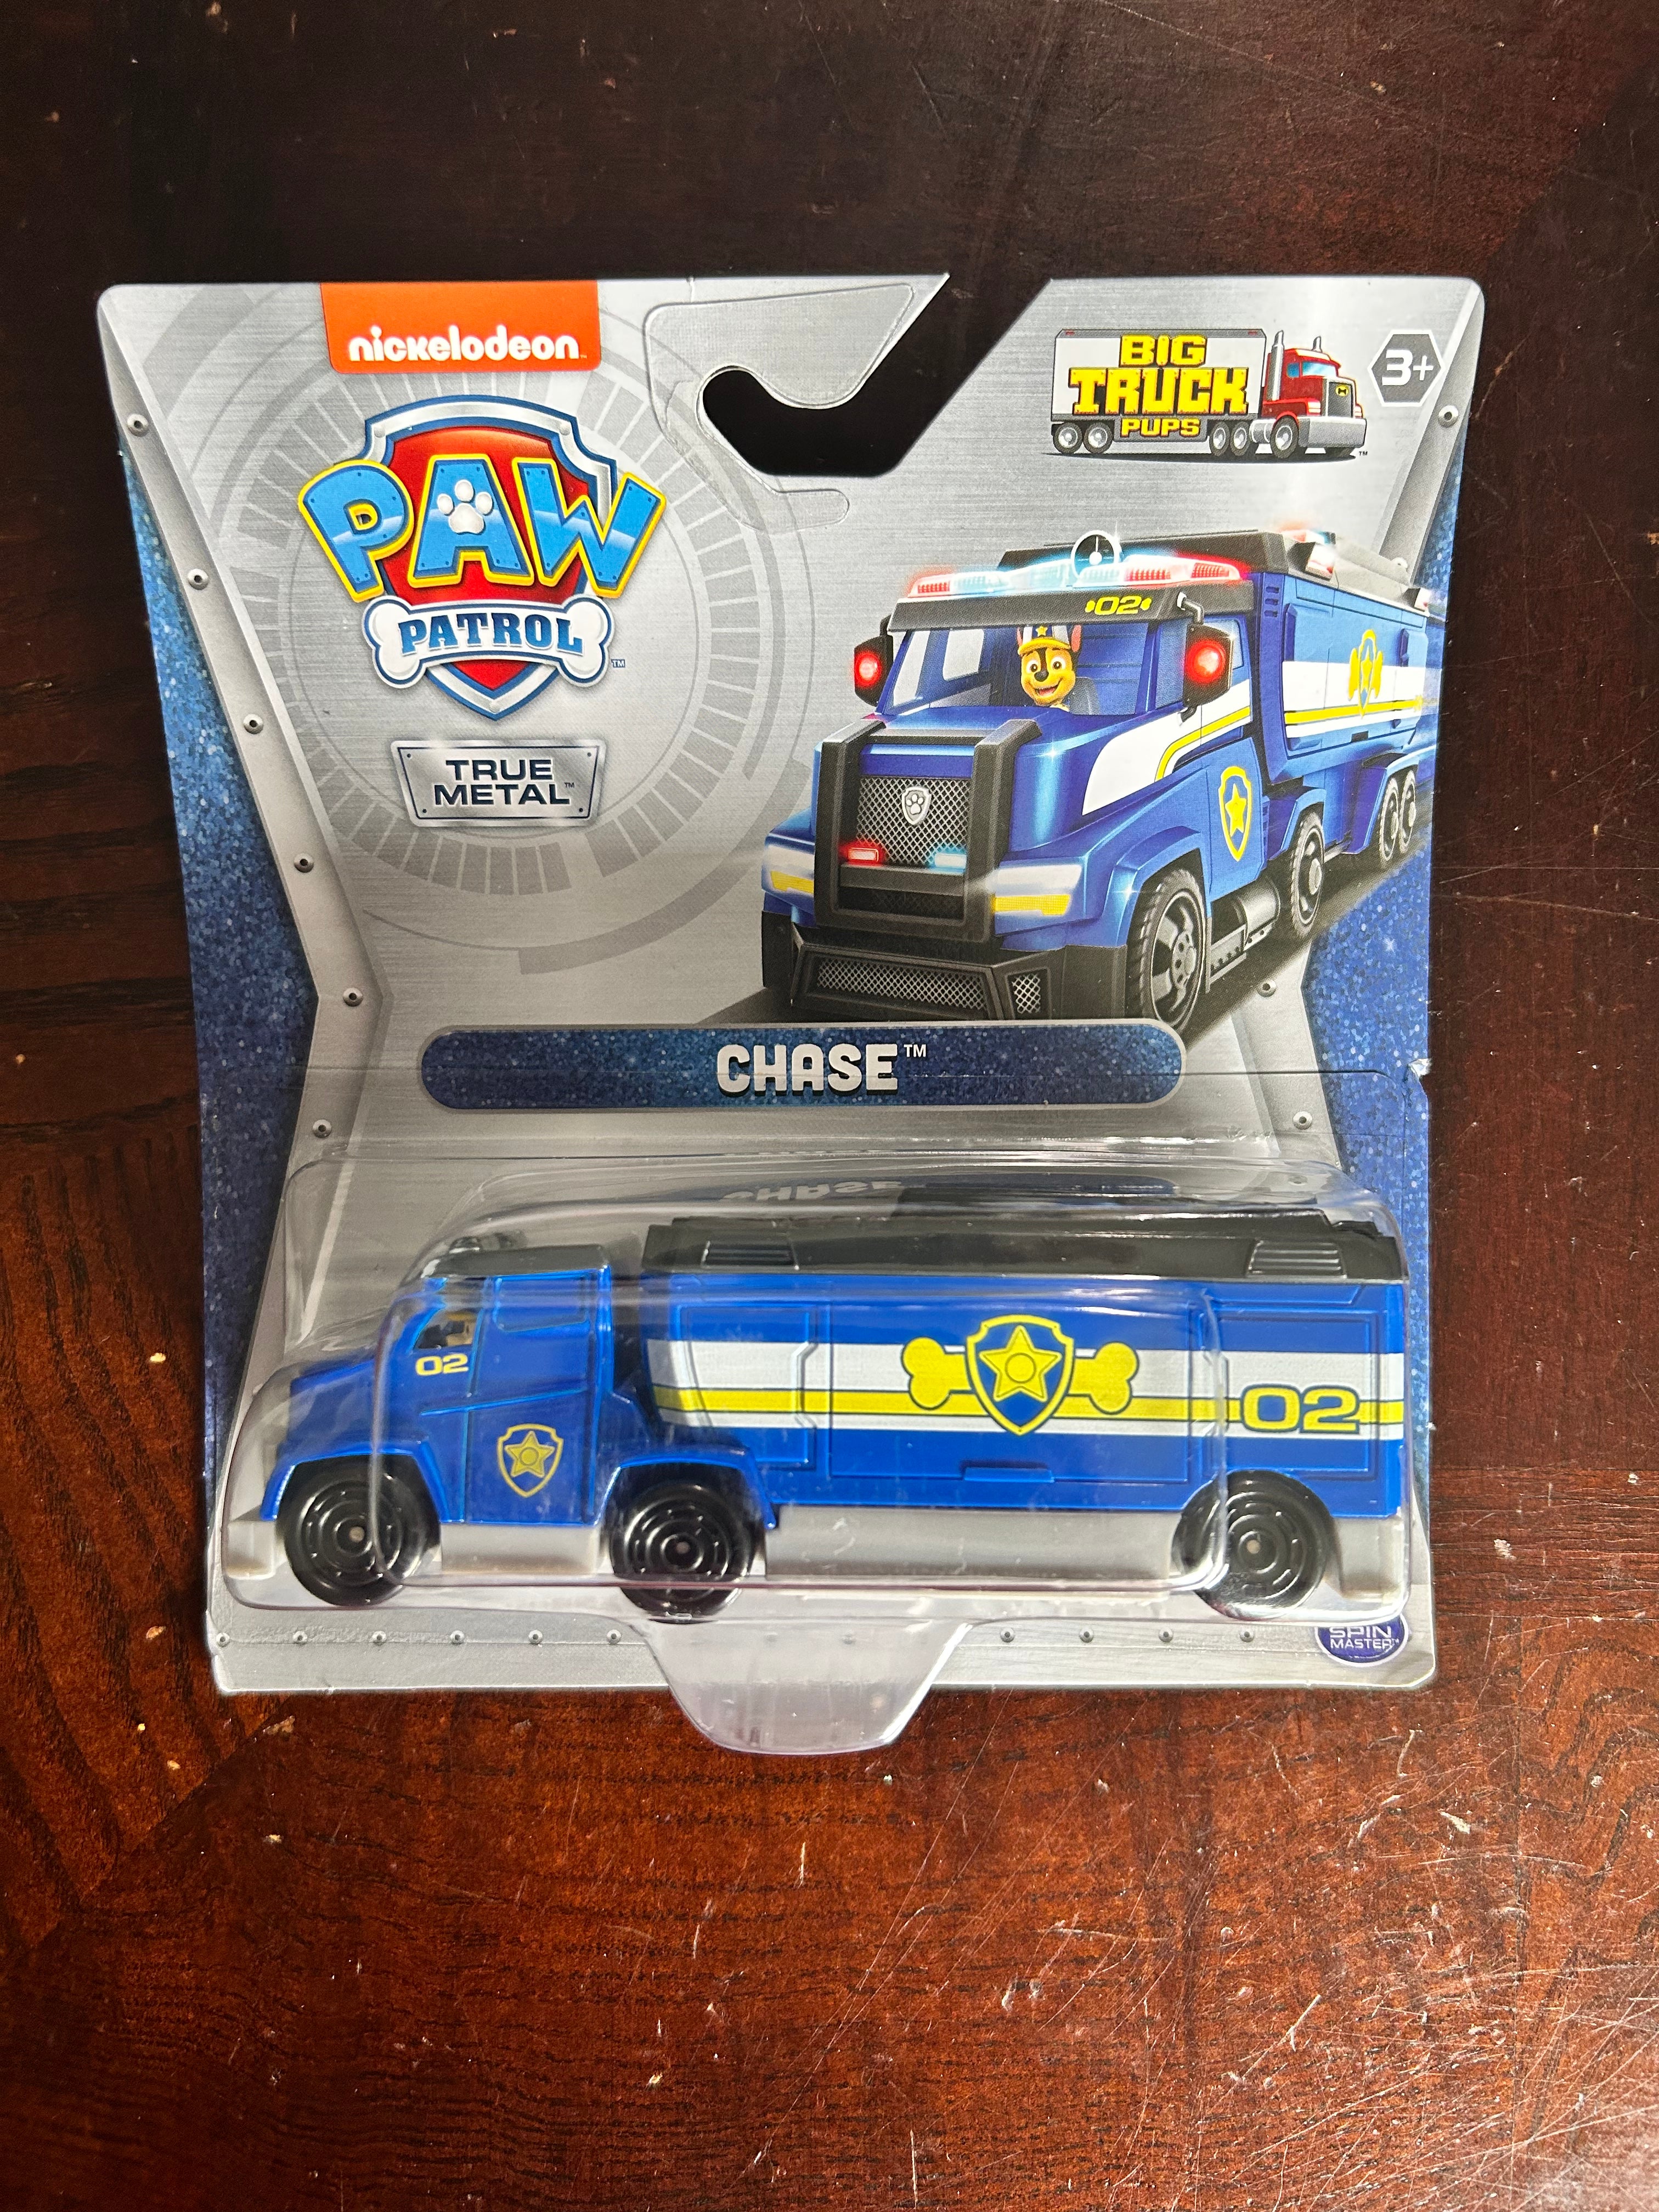 paw patrol chase truck